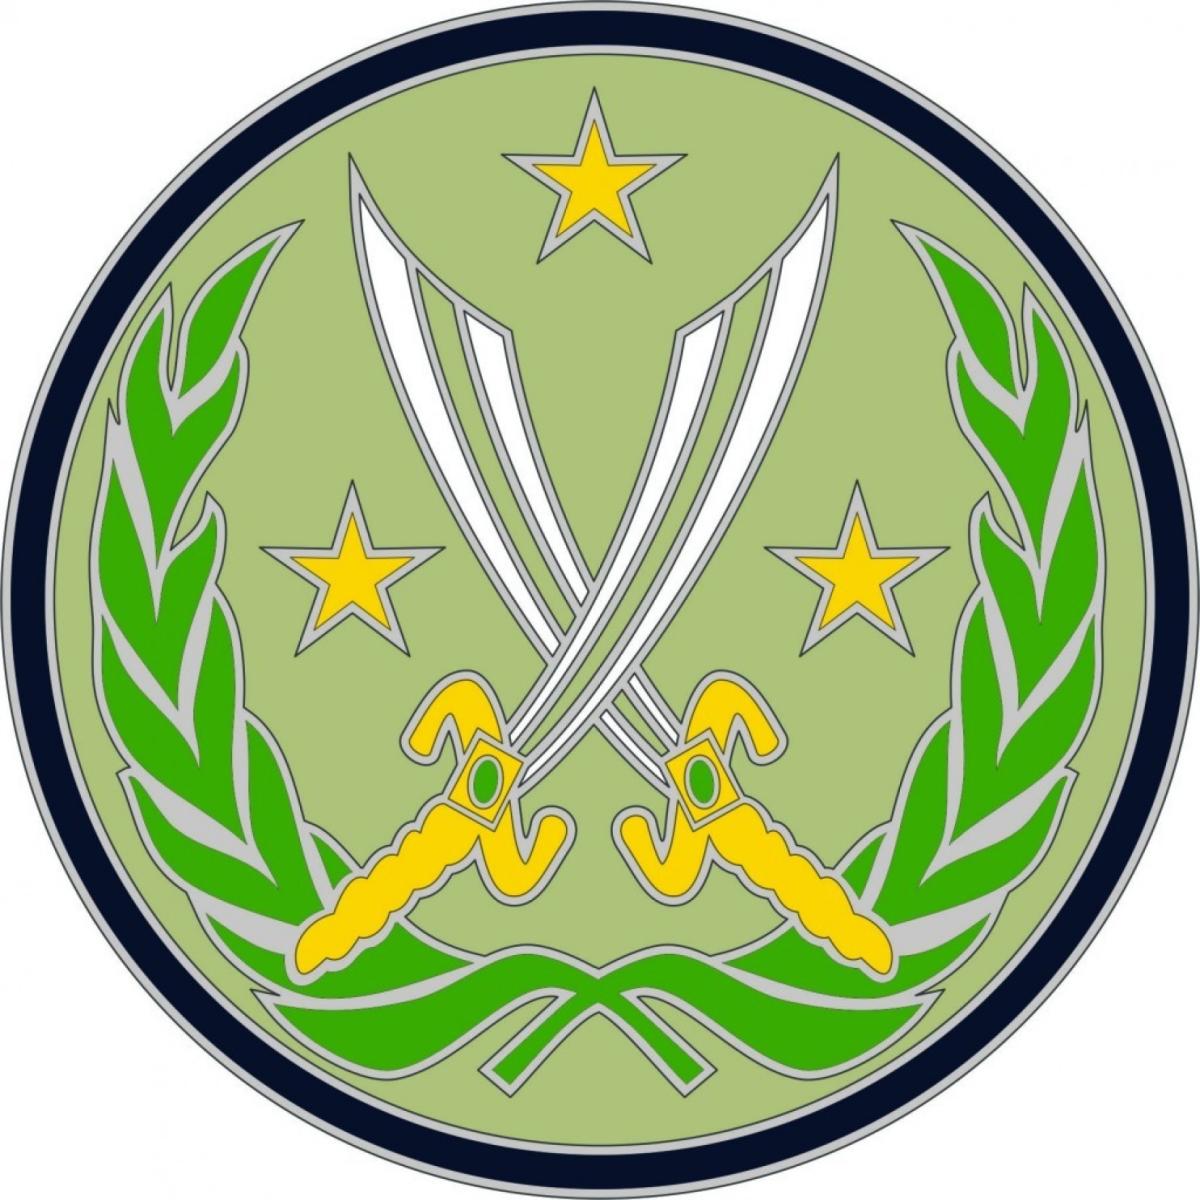 Here's the US Army's shoulder patch for the war against ISIS